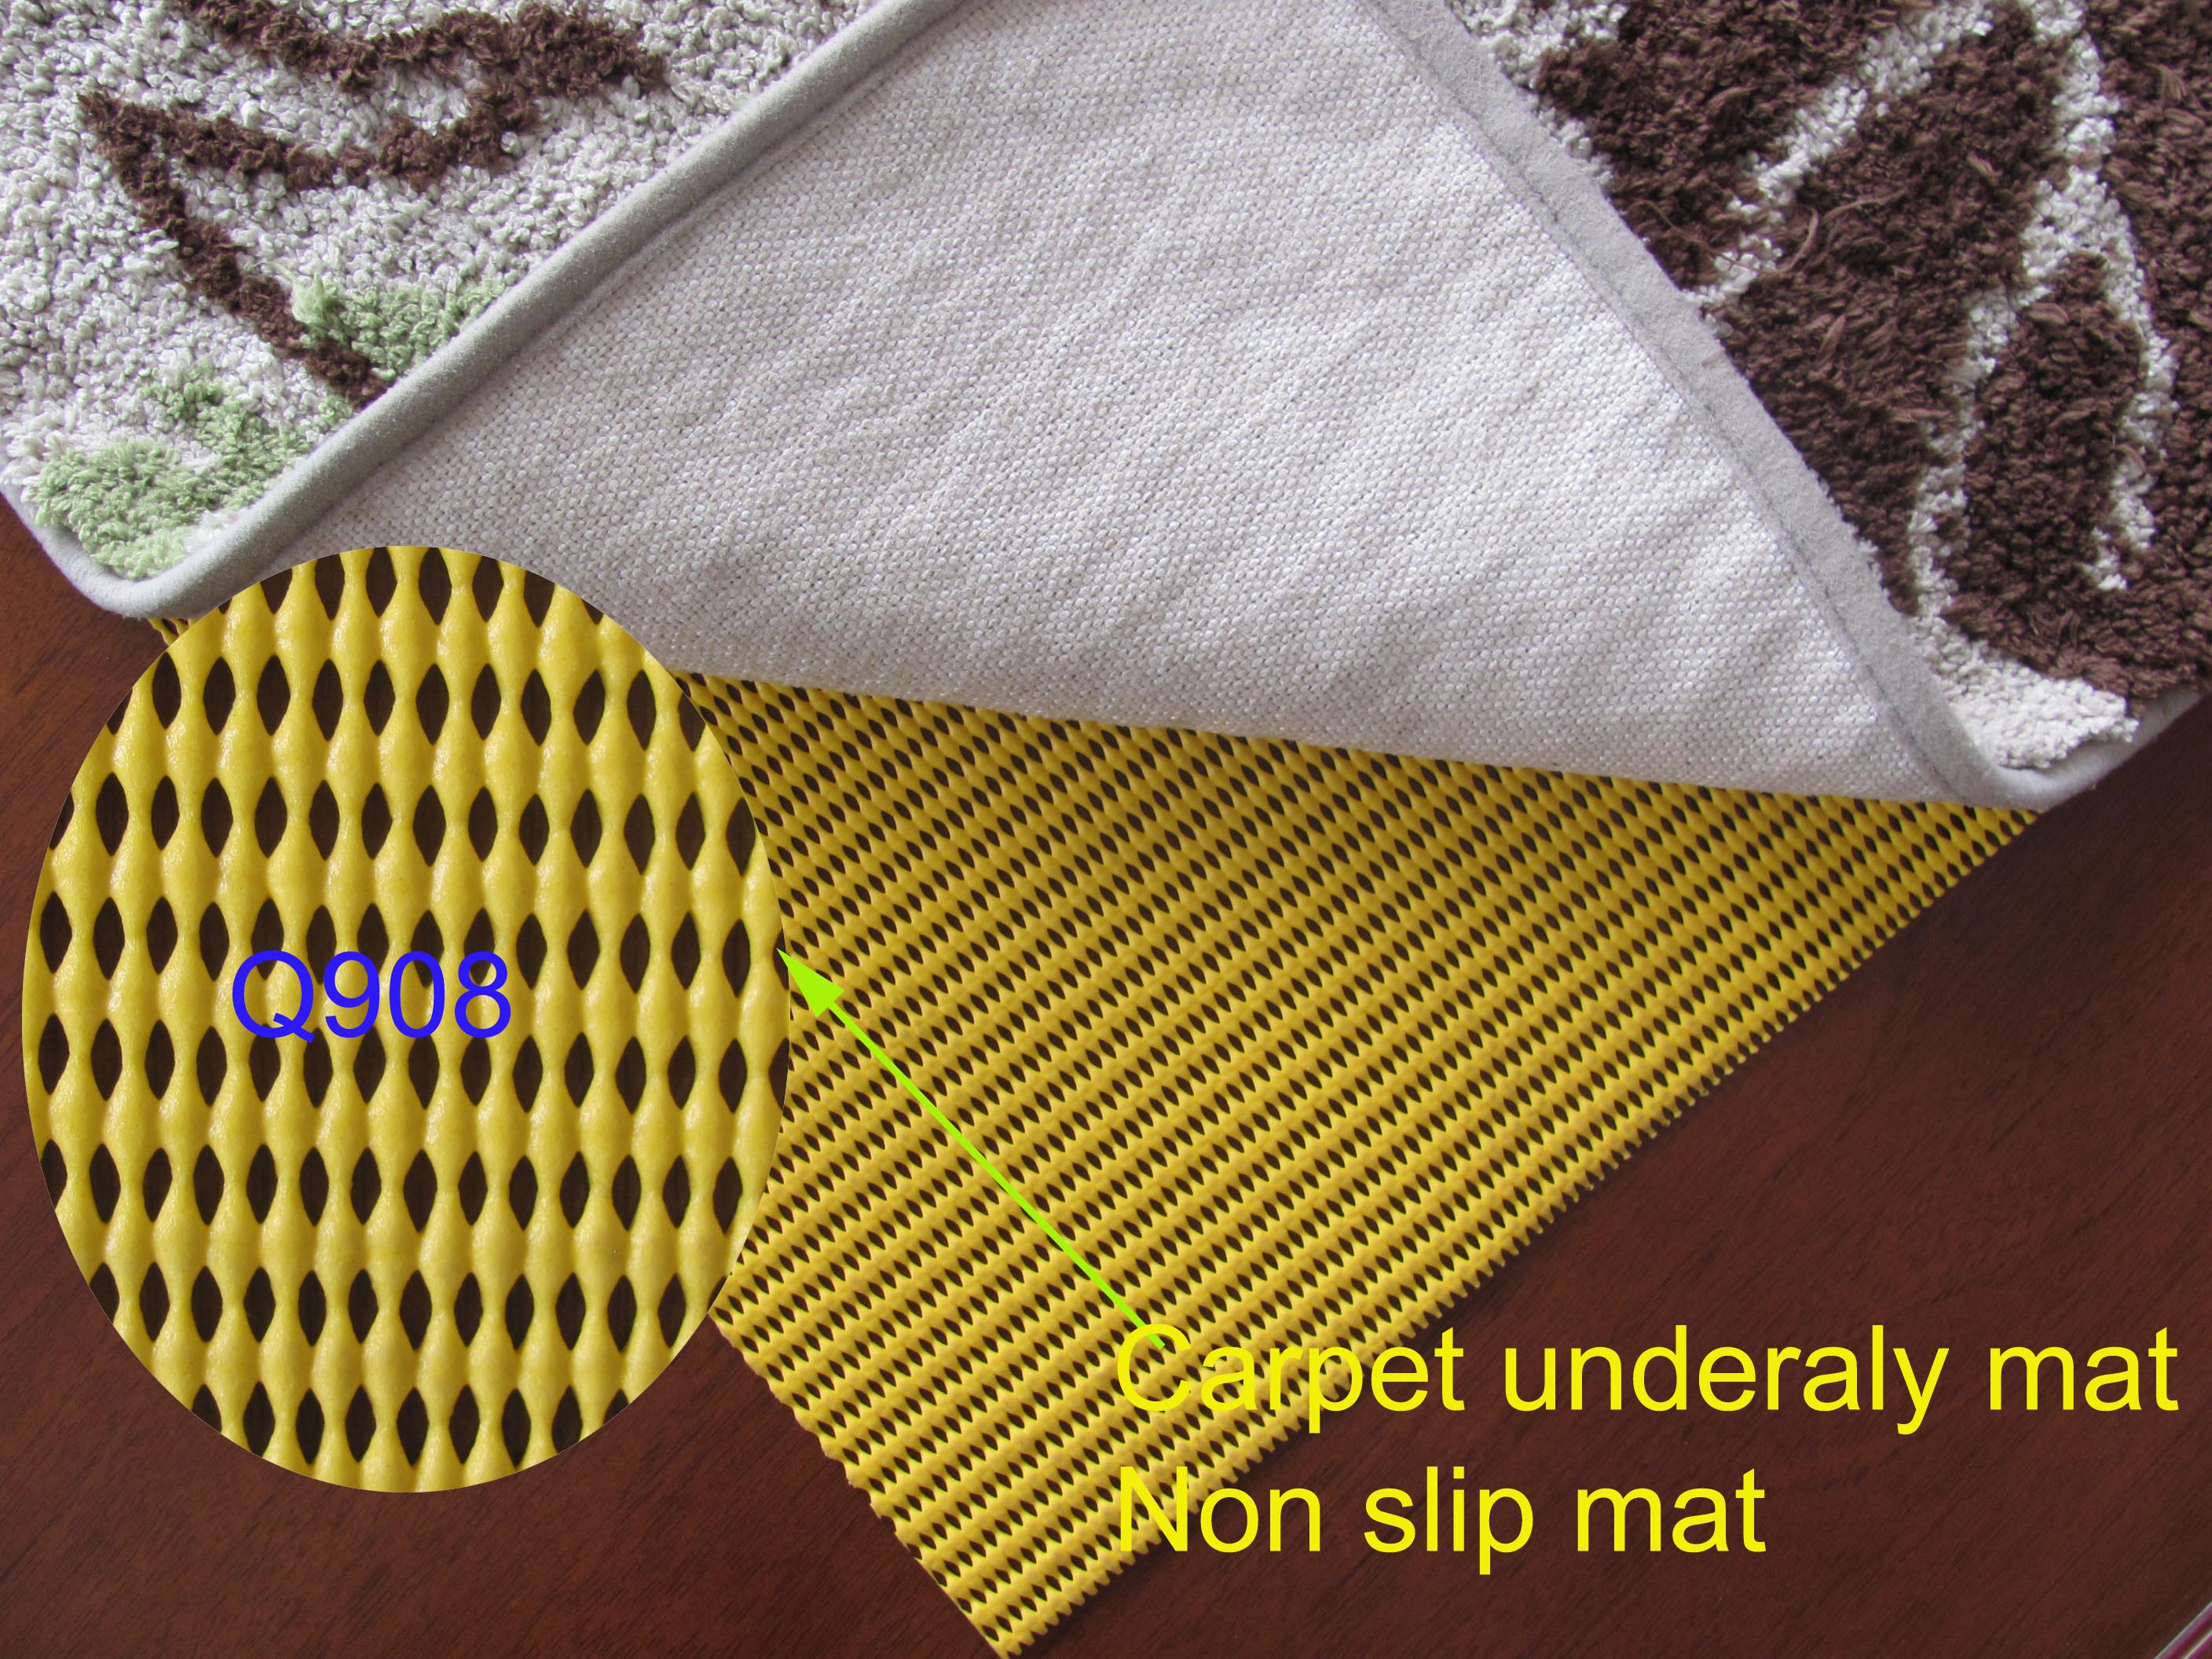 The Yellow Carpet Underlay Is Anti-skid, Wear-resistant And Durable